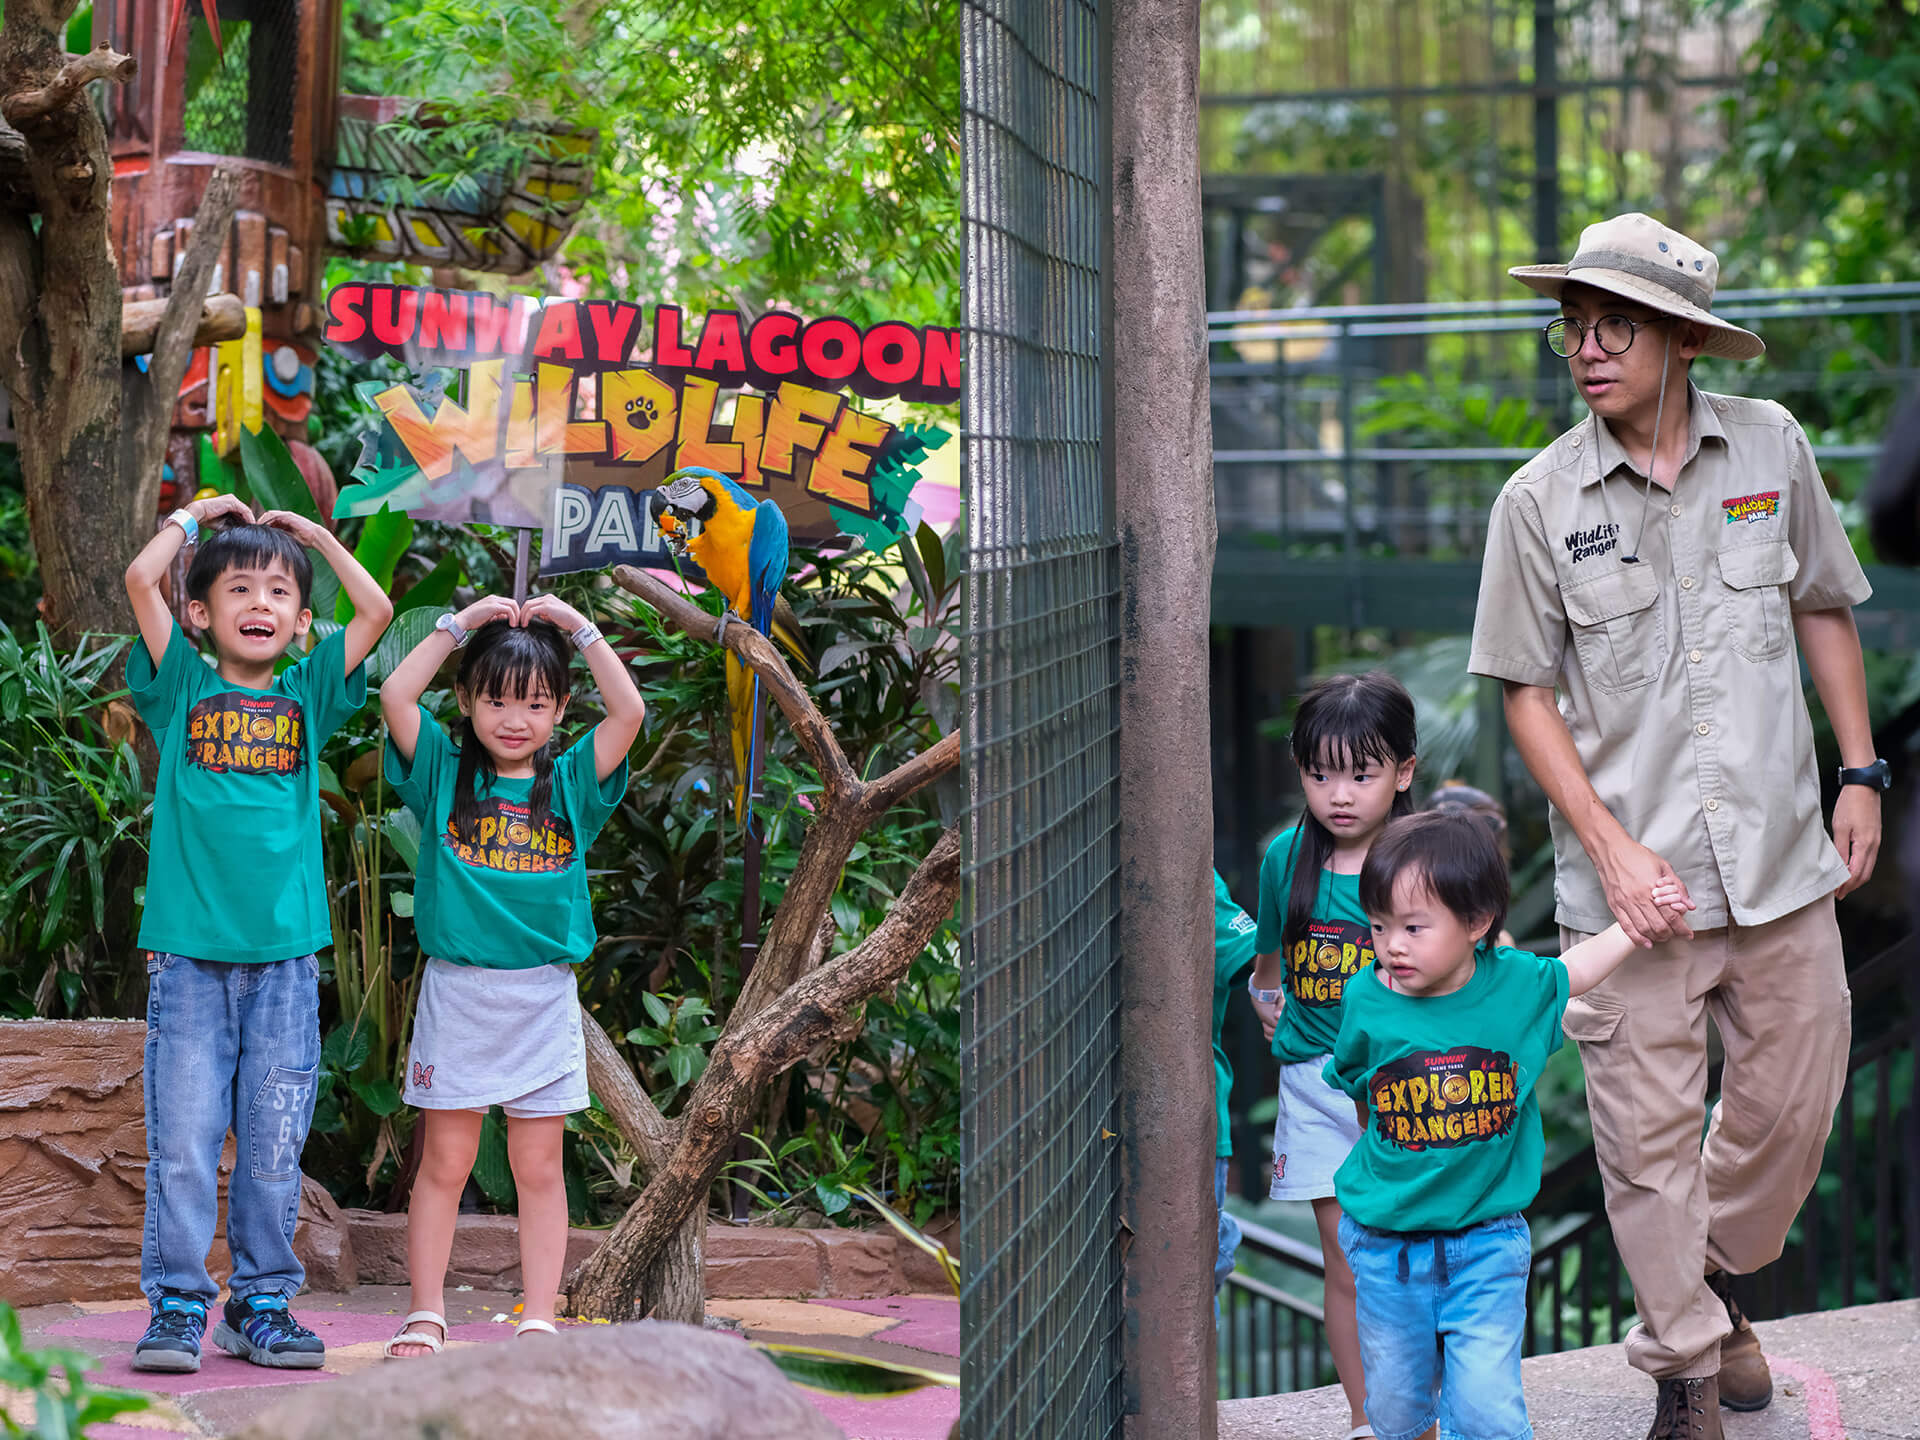 Let our experienced rangers bring your little ones around!